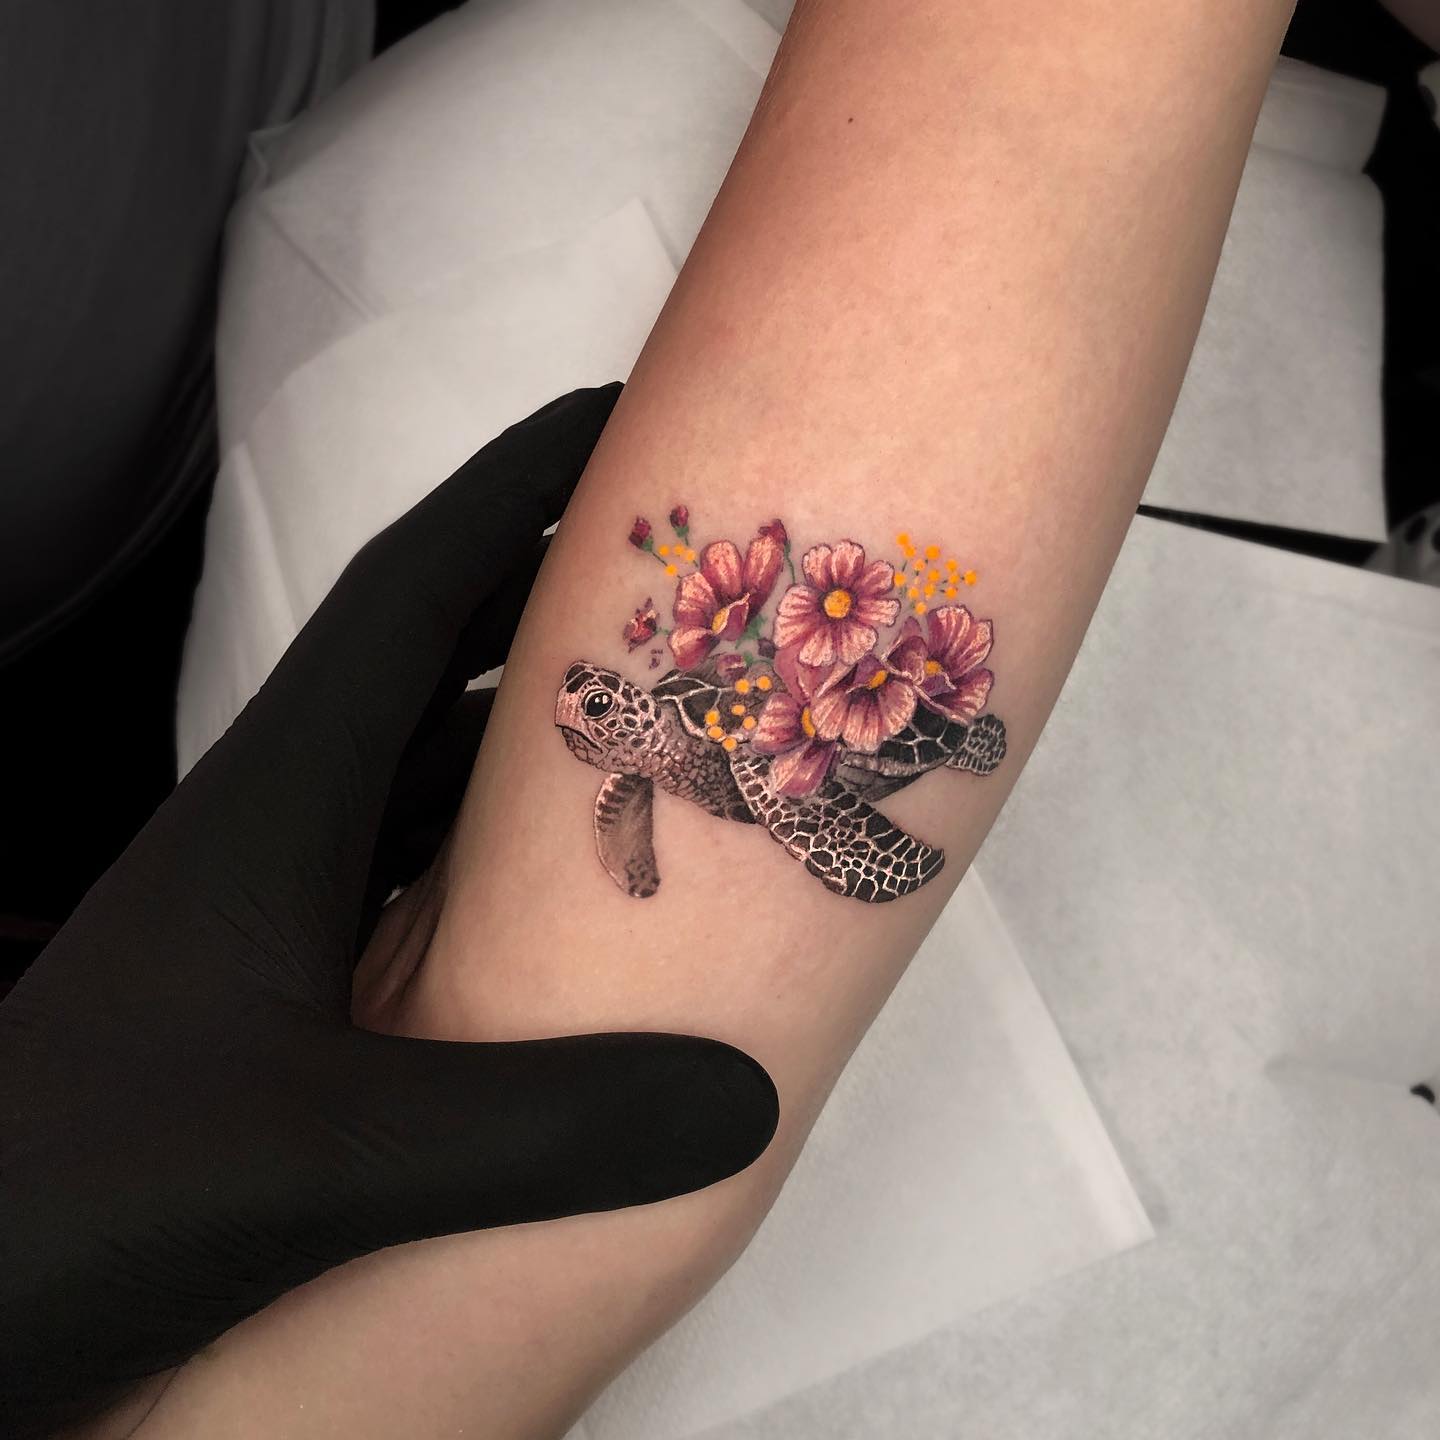 Micro-realistic sea turtle and flowers tattoo on the inner arm